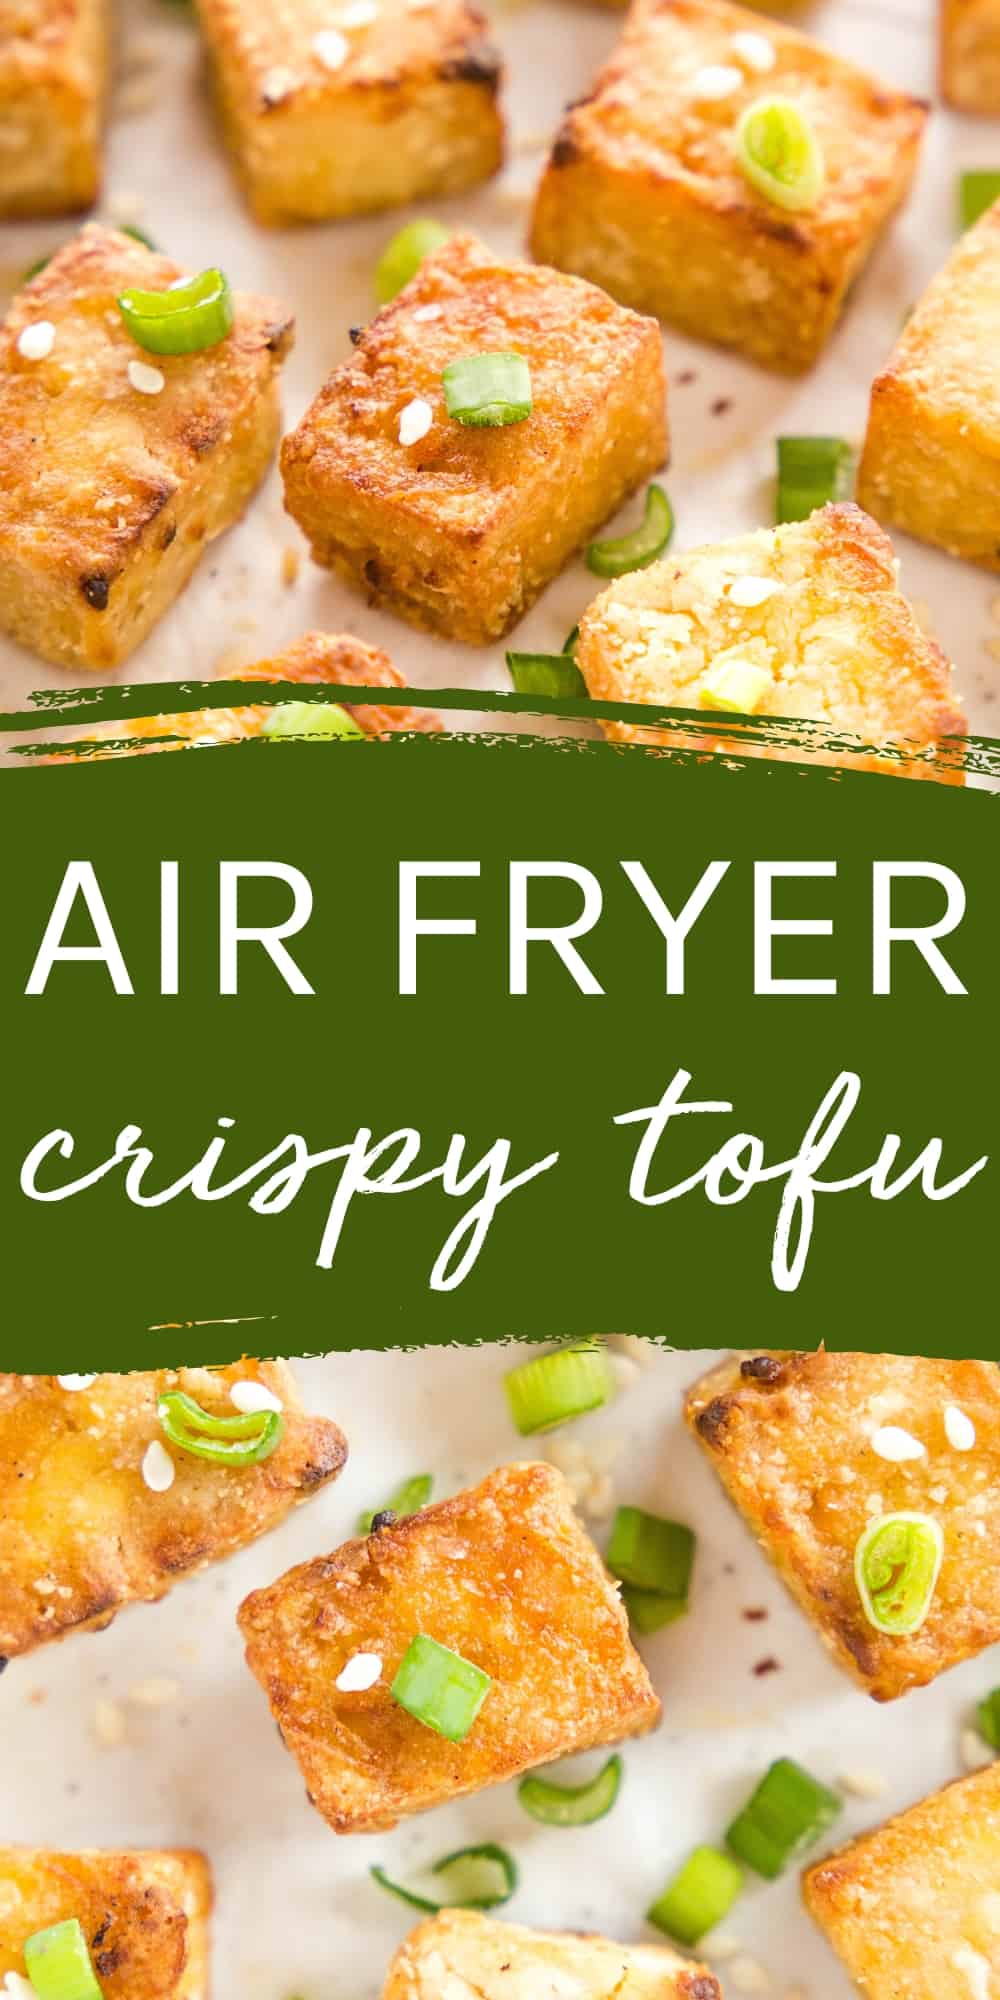 This Air Fryer Tofu is crispy and flavourful, perfect for adding plant-based protein to salads, stir fried veggies or noodles, or your favourite rice bowls. Easy-to-make crispy baked tofu that's ready in minutes! Recipe from thebusybaker.ca! #airfryertofu #crispytofu #crispytofurecipe #crispybakedtofu #howtomakecrispytofu #plantbased #protein #salad #healthy via @busybakerblog